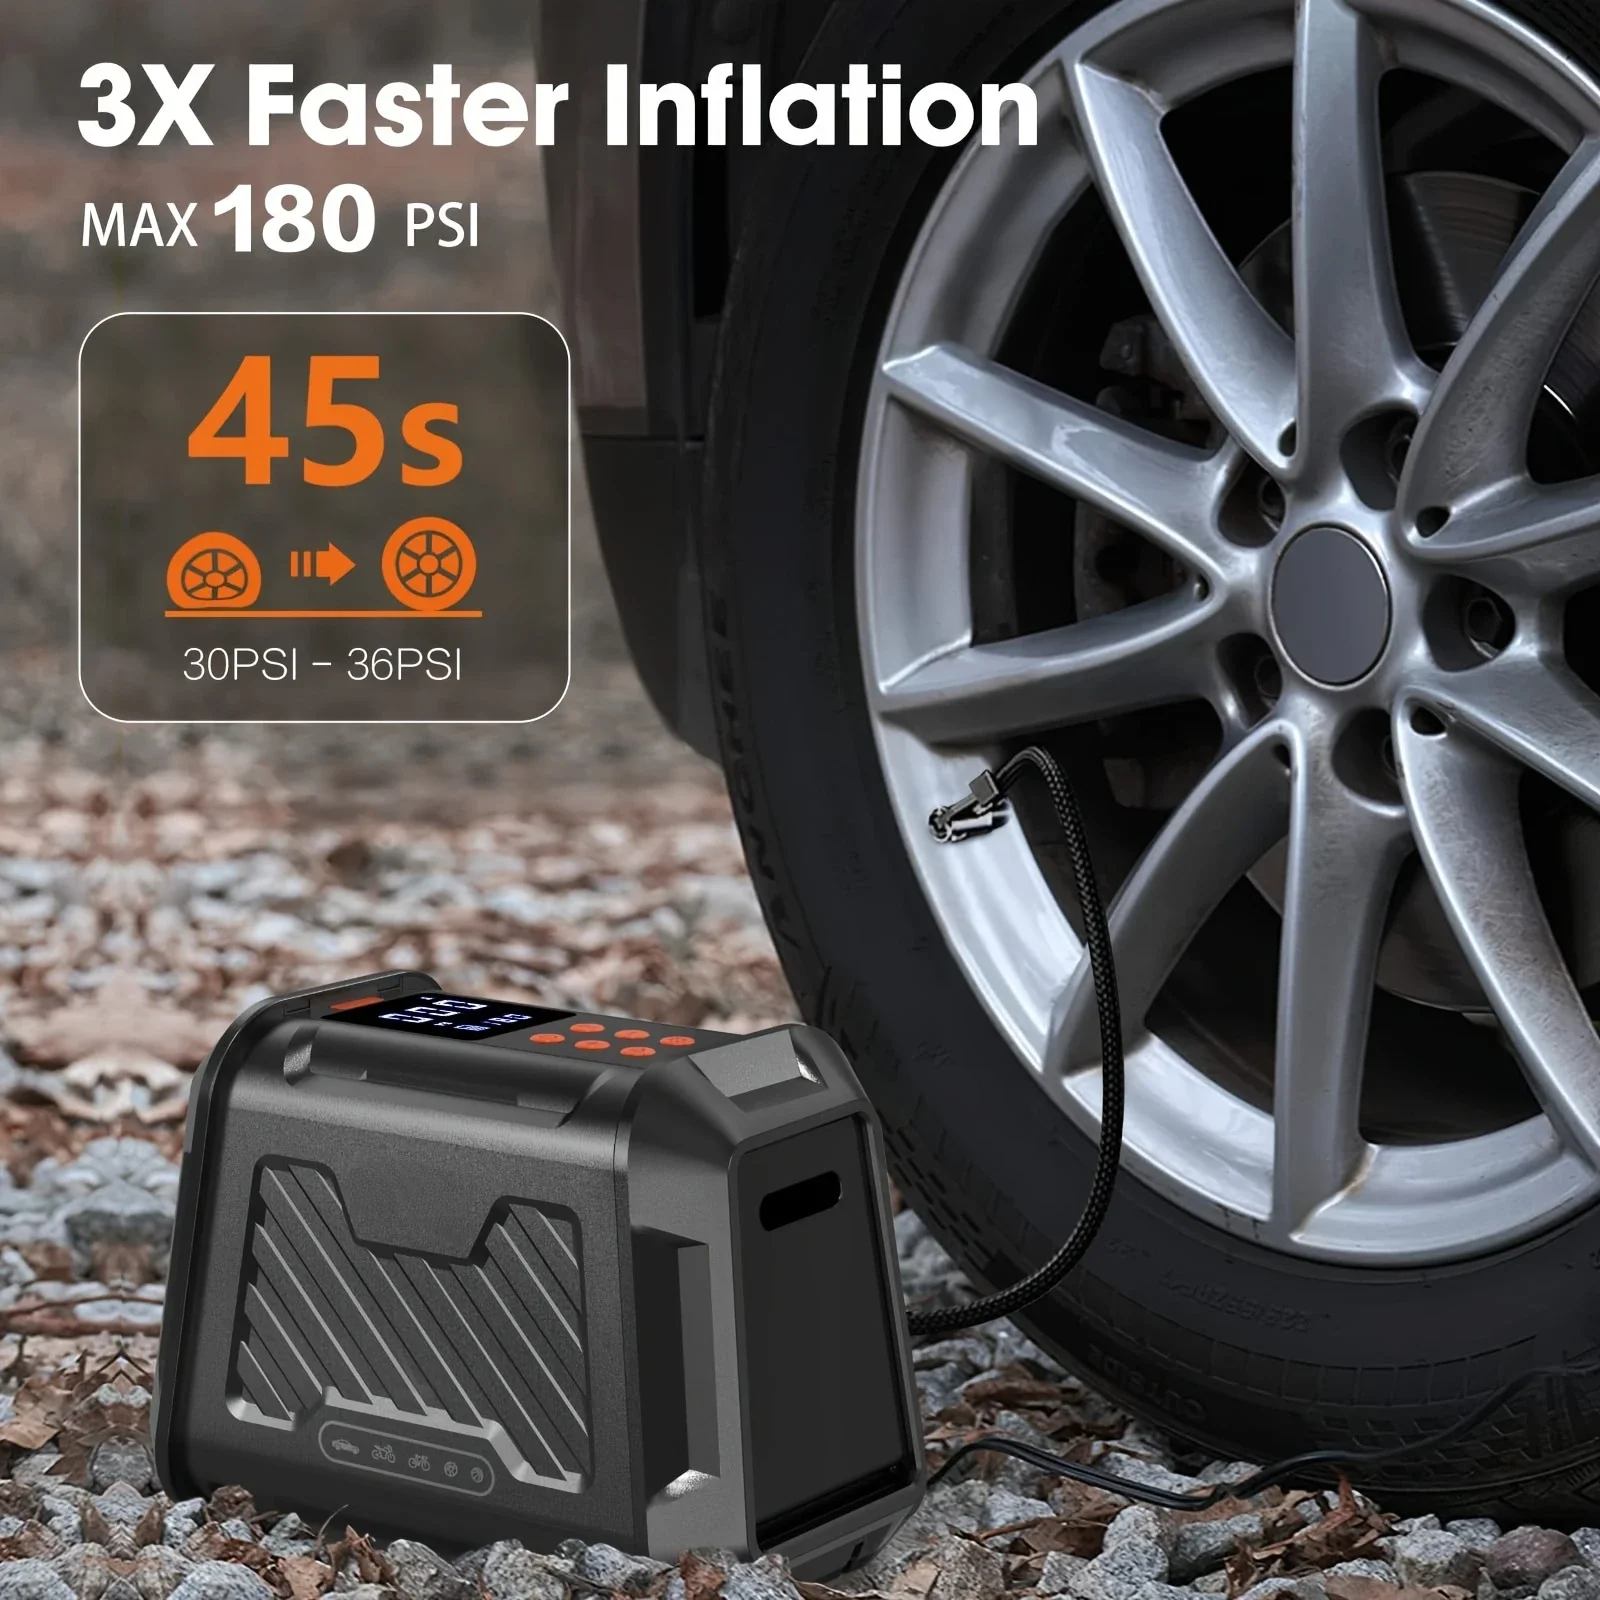 

One of the Best Carmot Tire Inflators: Portable, Efficient, and Cordless Air Compressor for Car, 180 PSI Power, 3X Faster Inflat